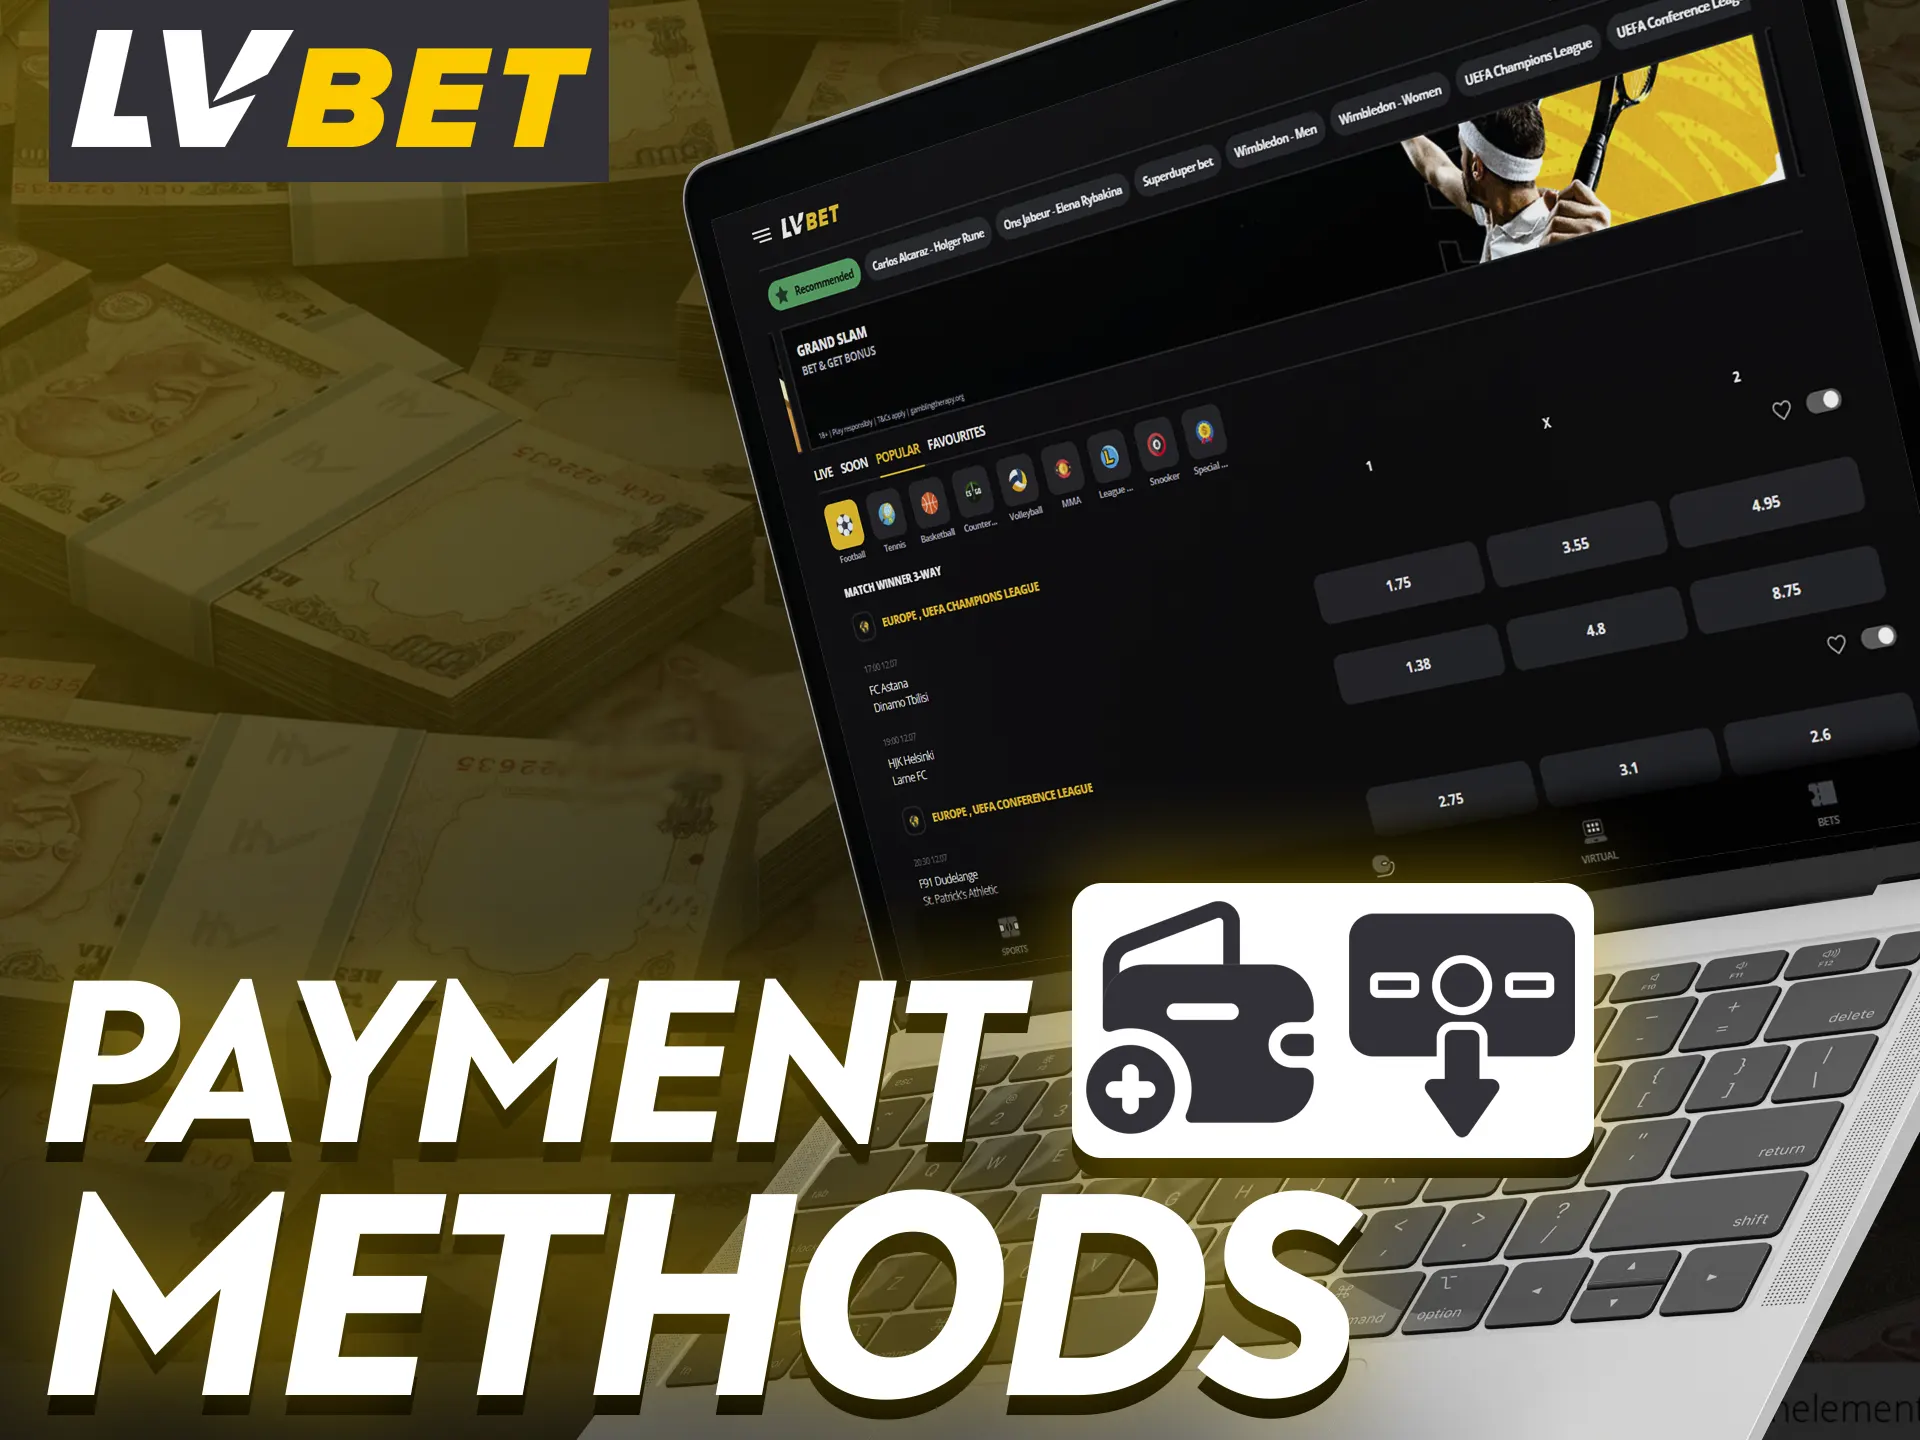 LV Bet has many options for deposits and withdrawals.